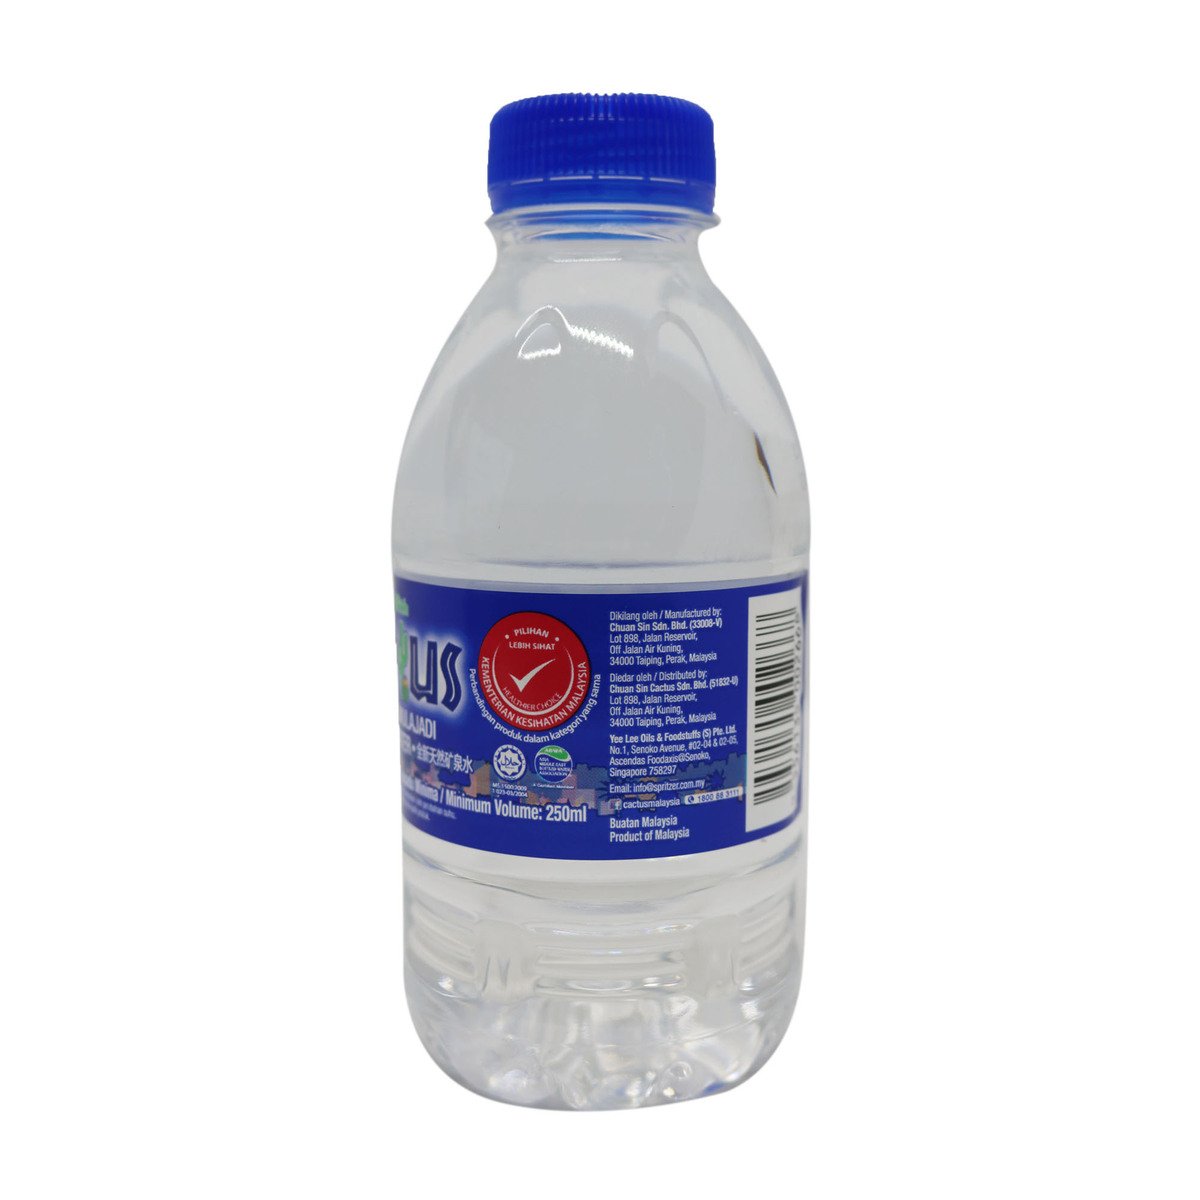 Cactus Mineral Water 250ml